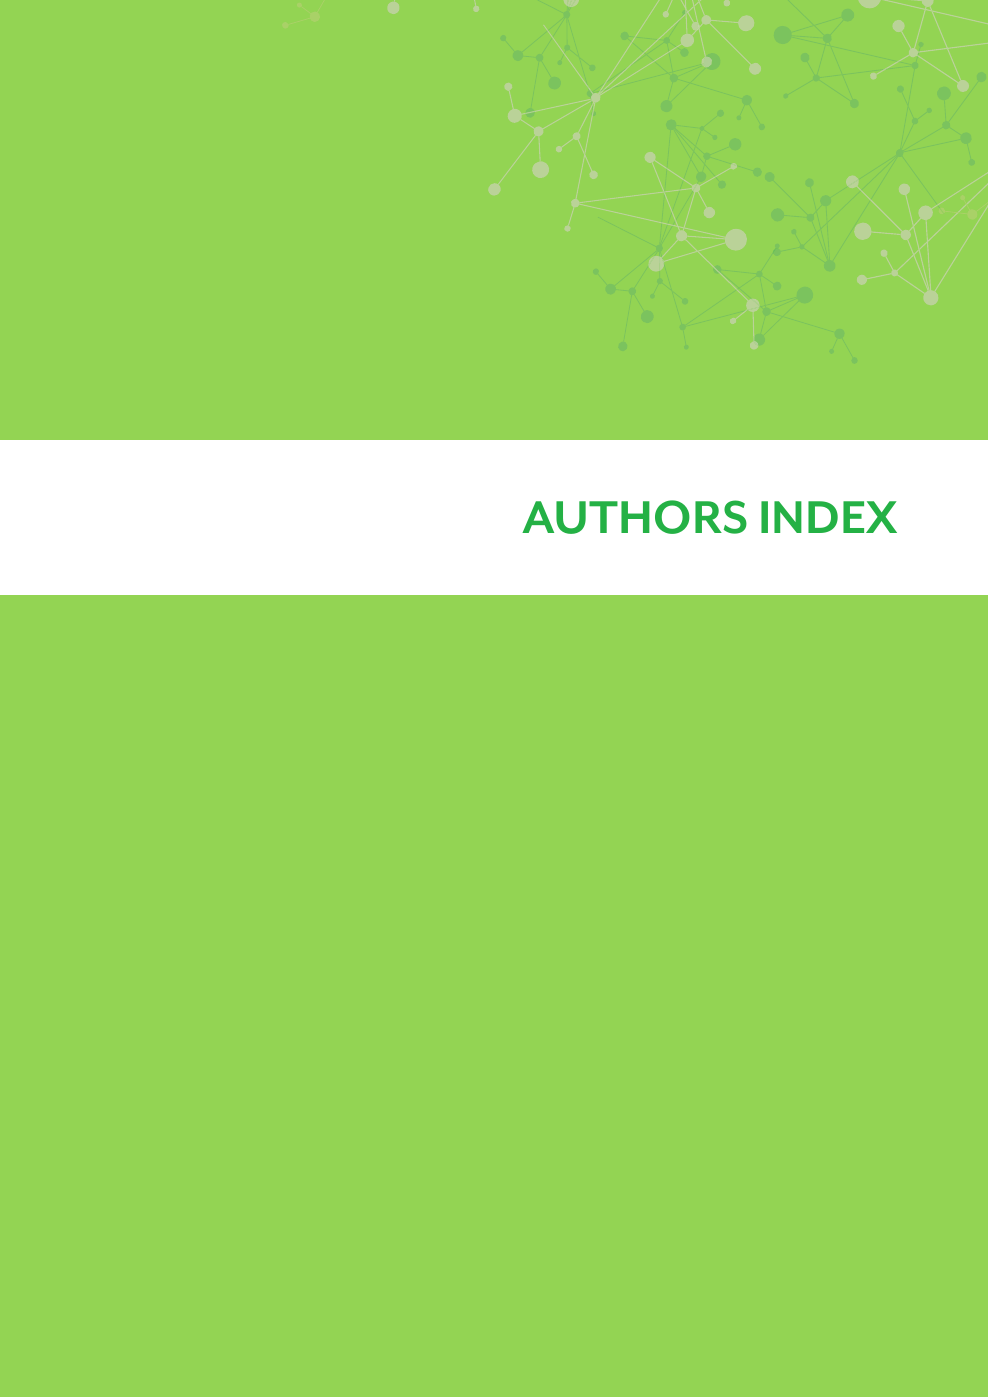 Authors Index Topic Of Research Paper In Veterinary Science